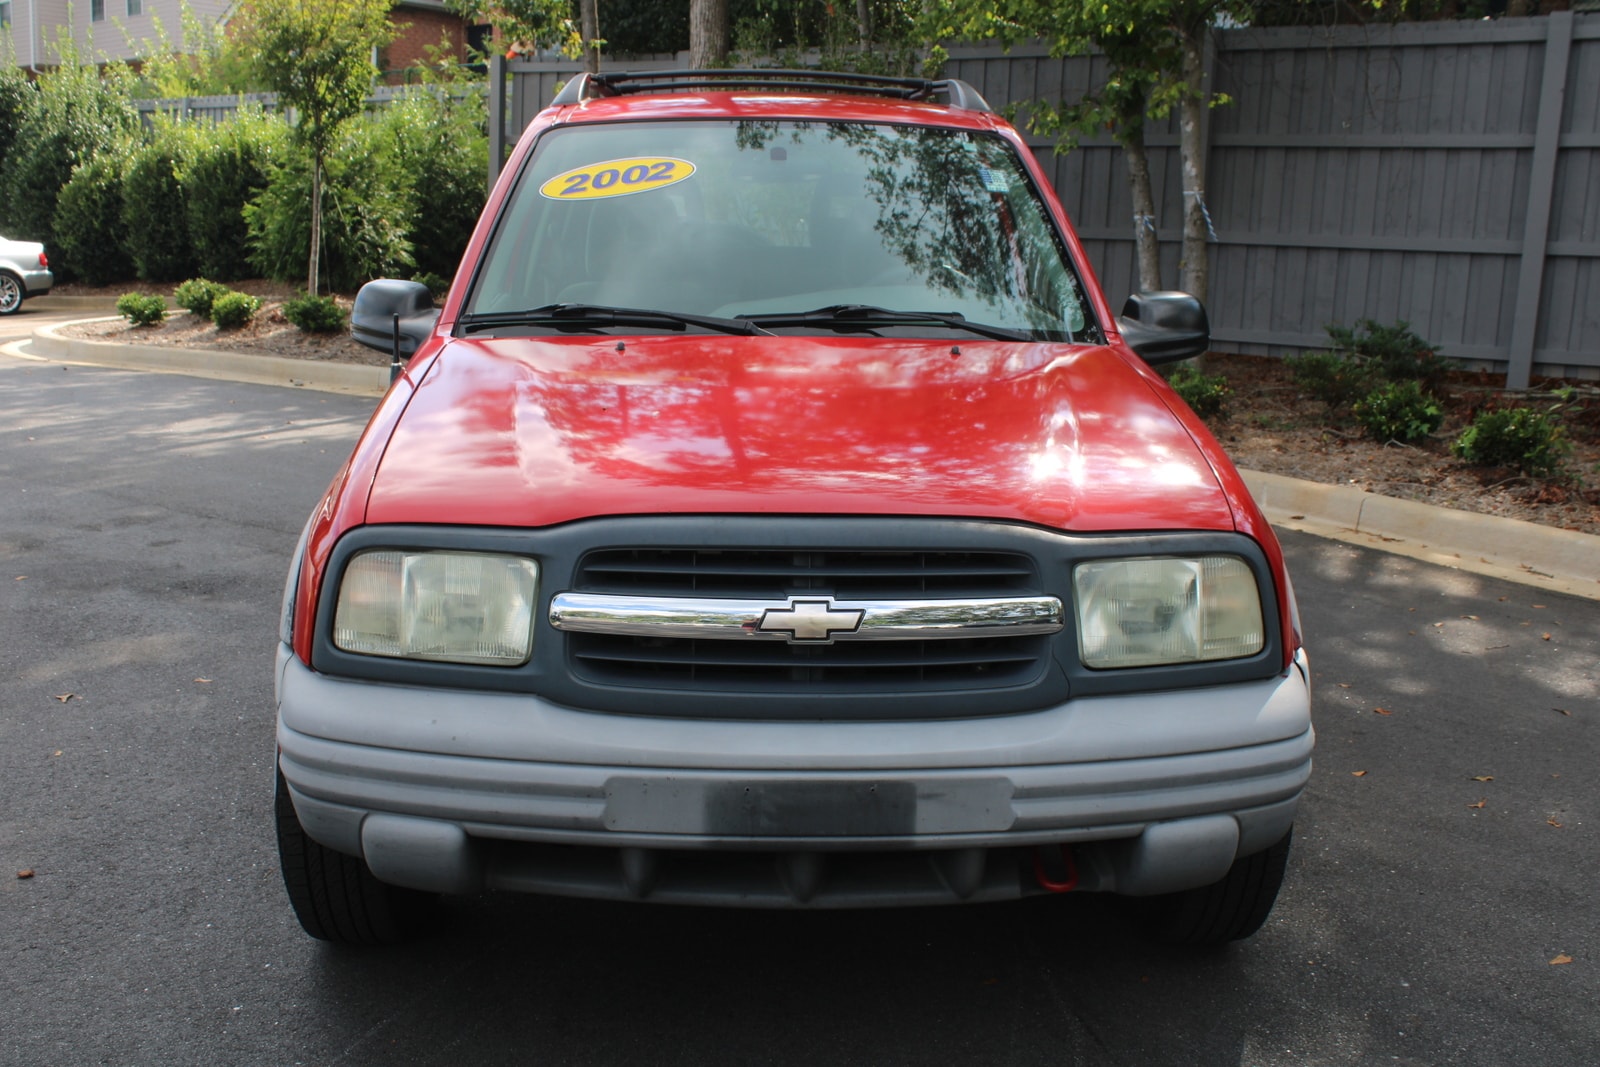 Used 2002 Chevrolet Tracker ZR2 with VIN 2CNBJ734326952641 for sale in Greenville, SC